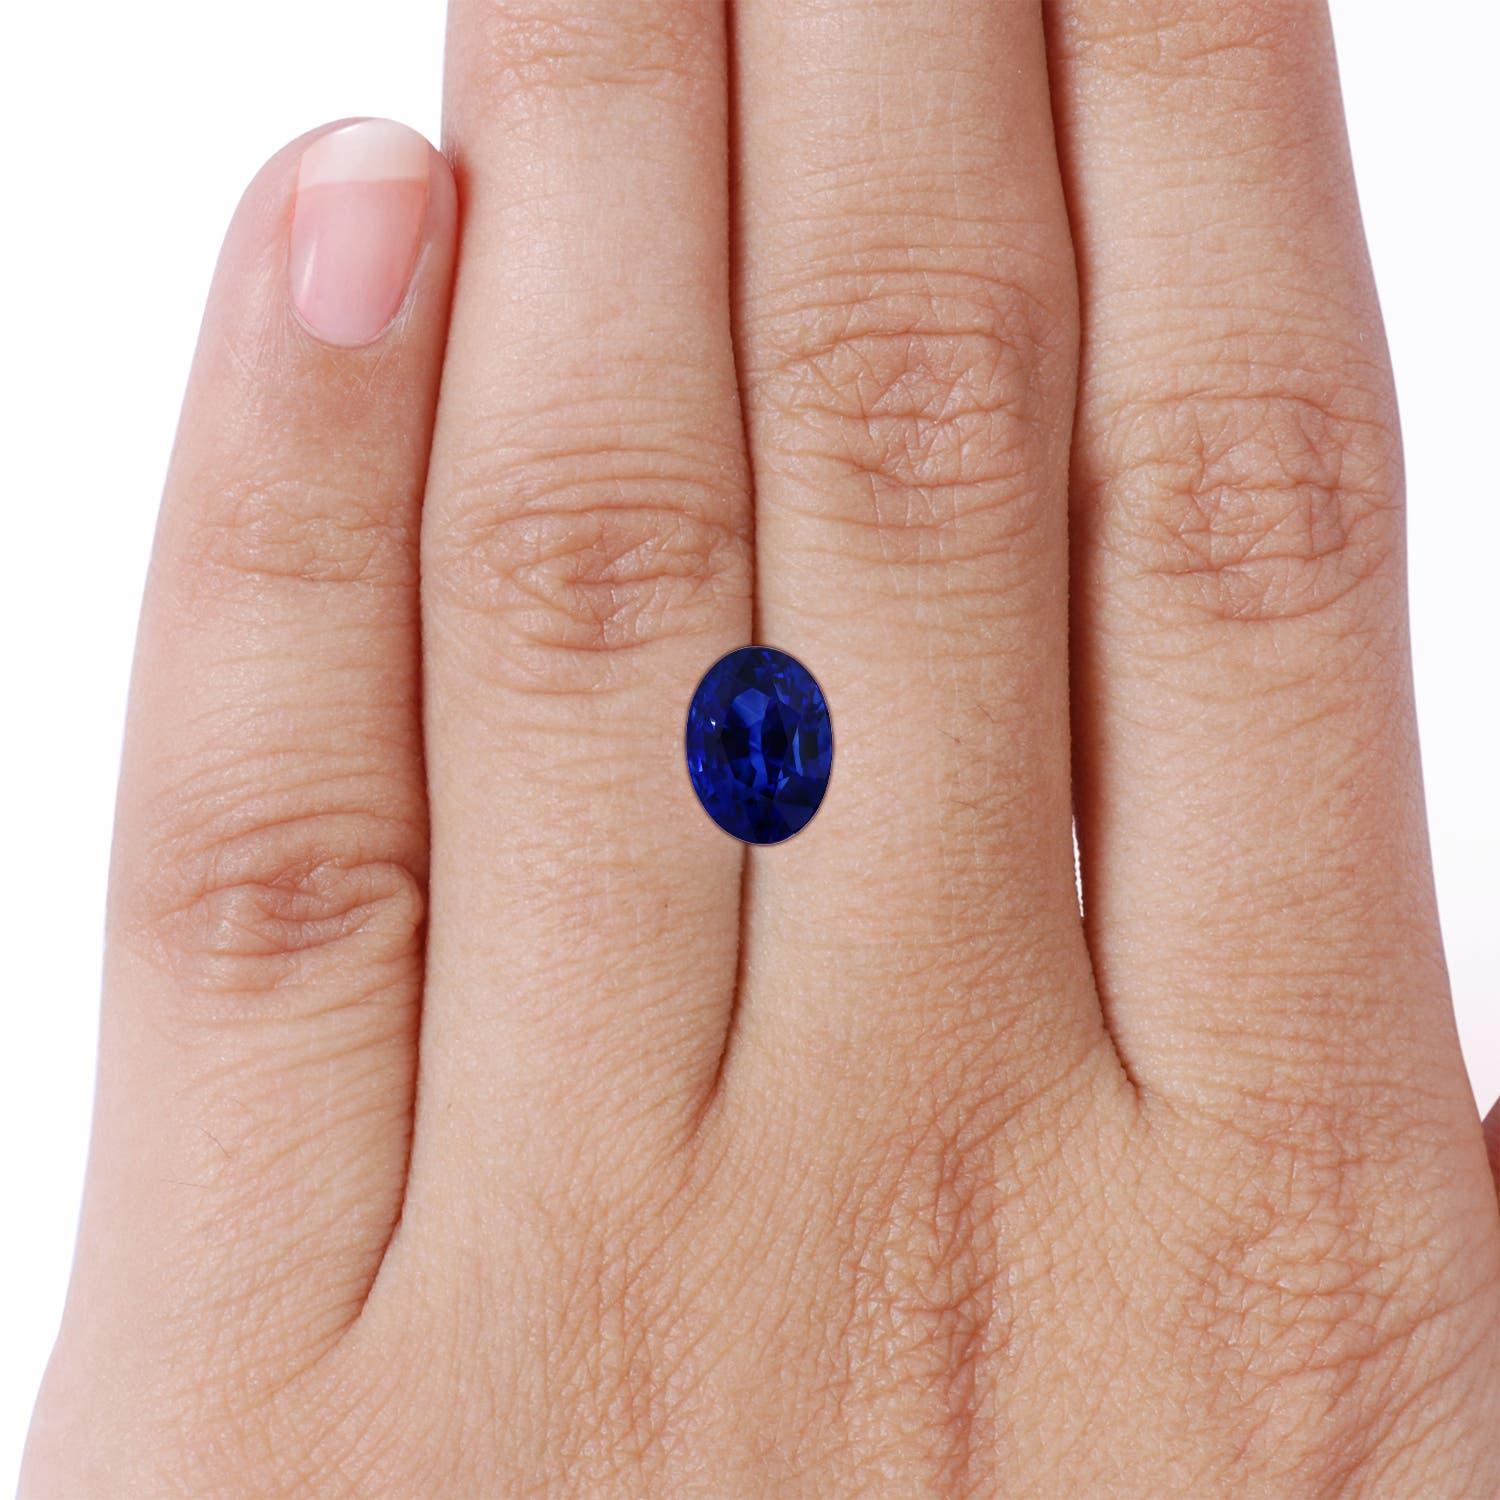 For Sale:  Angara Princess Diana Inspired Gia Certified Blue Sapphire Halo Ring in Platinum 7